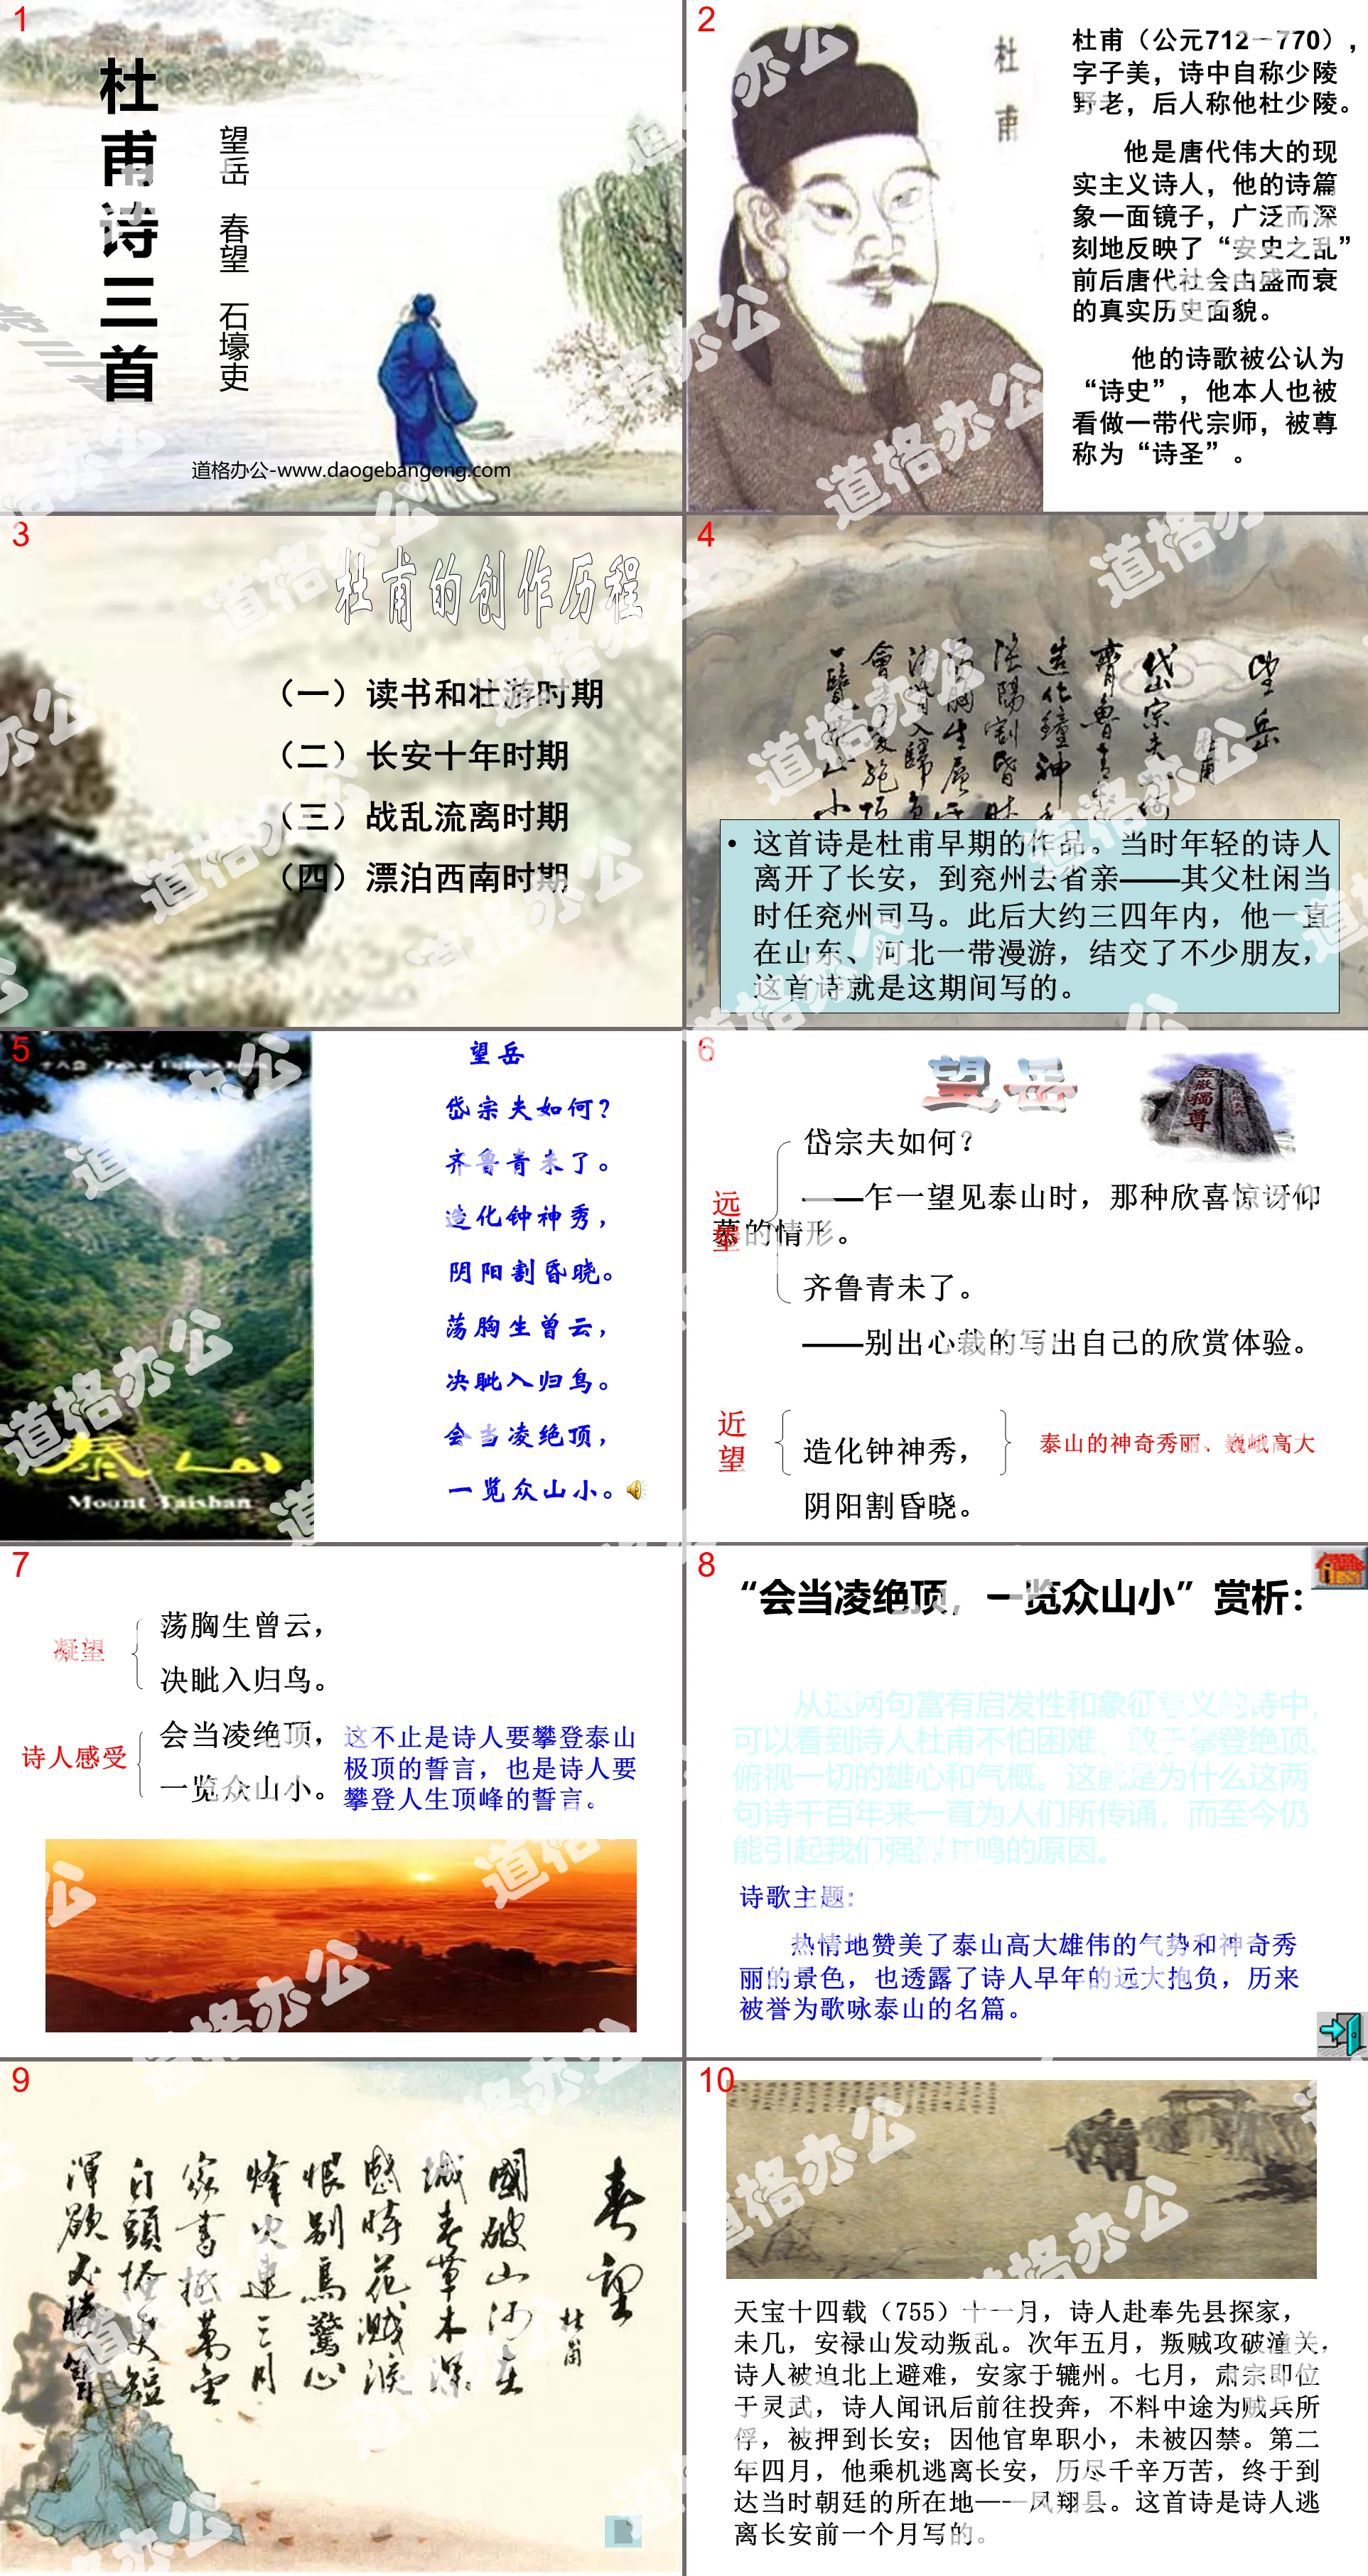 "Three Poems by Du Fu" PPT courseware 2